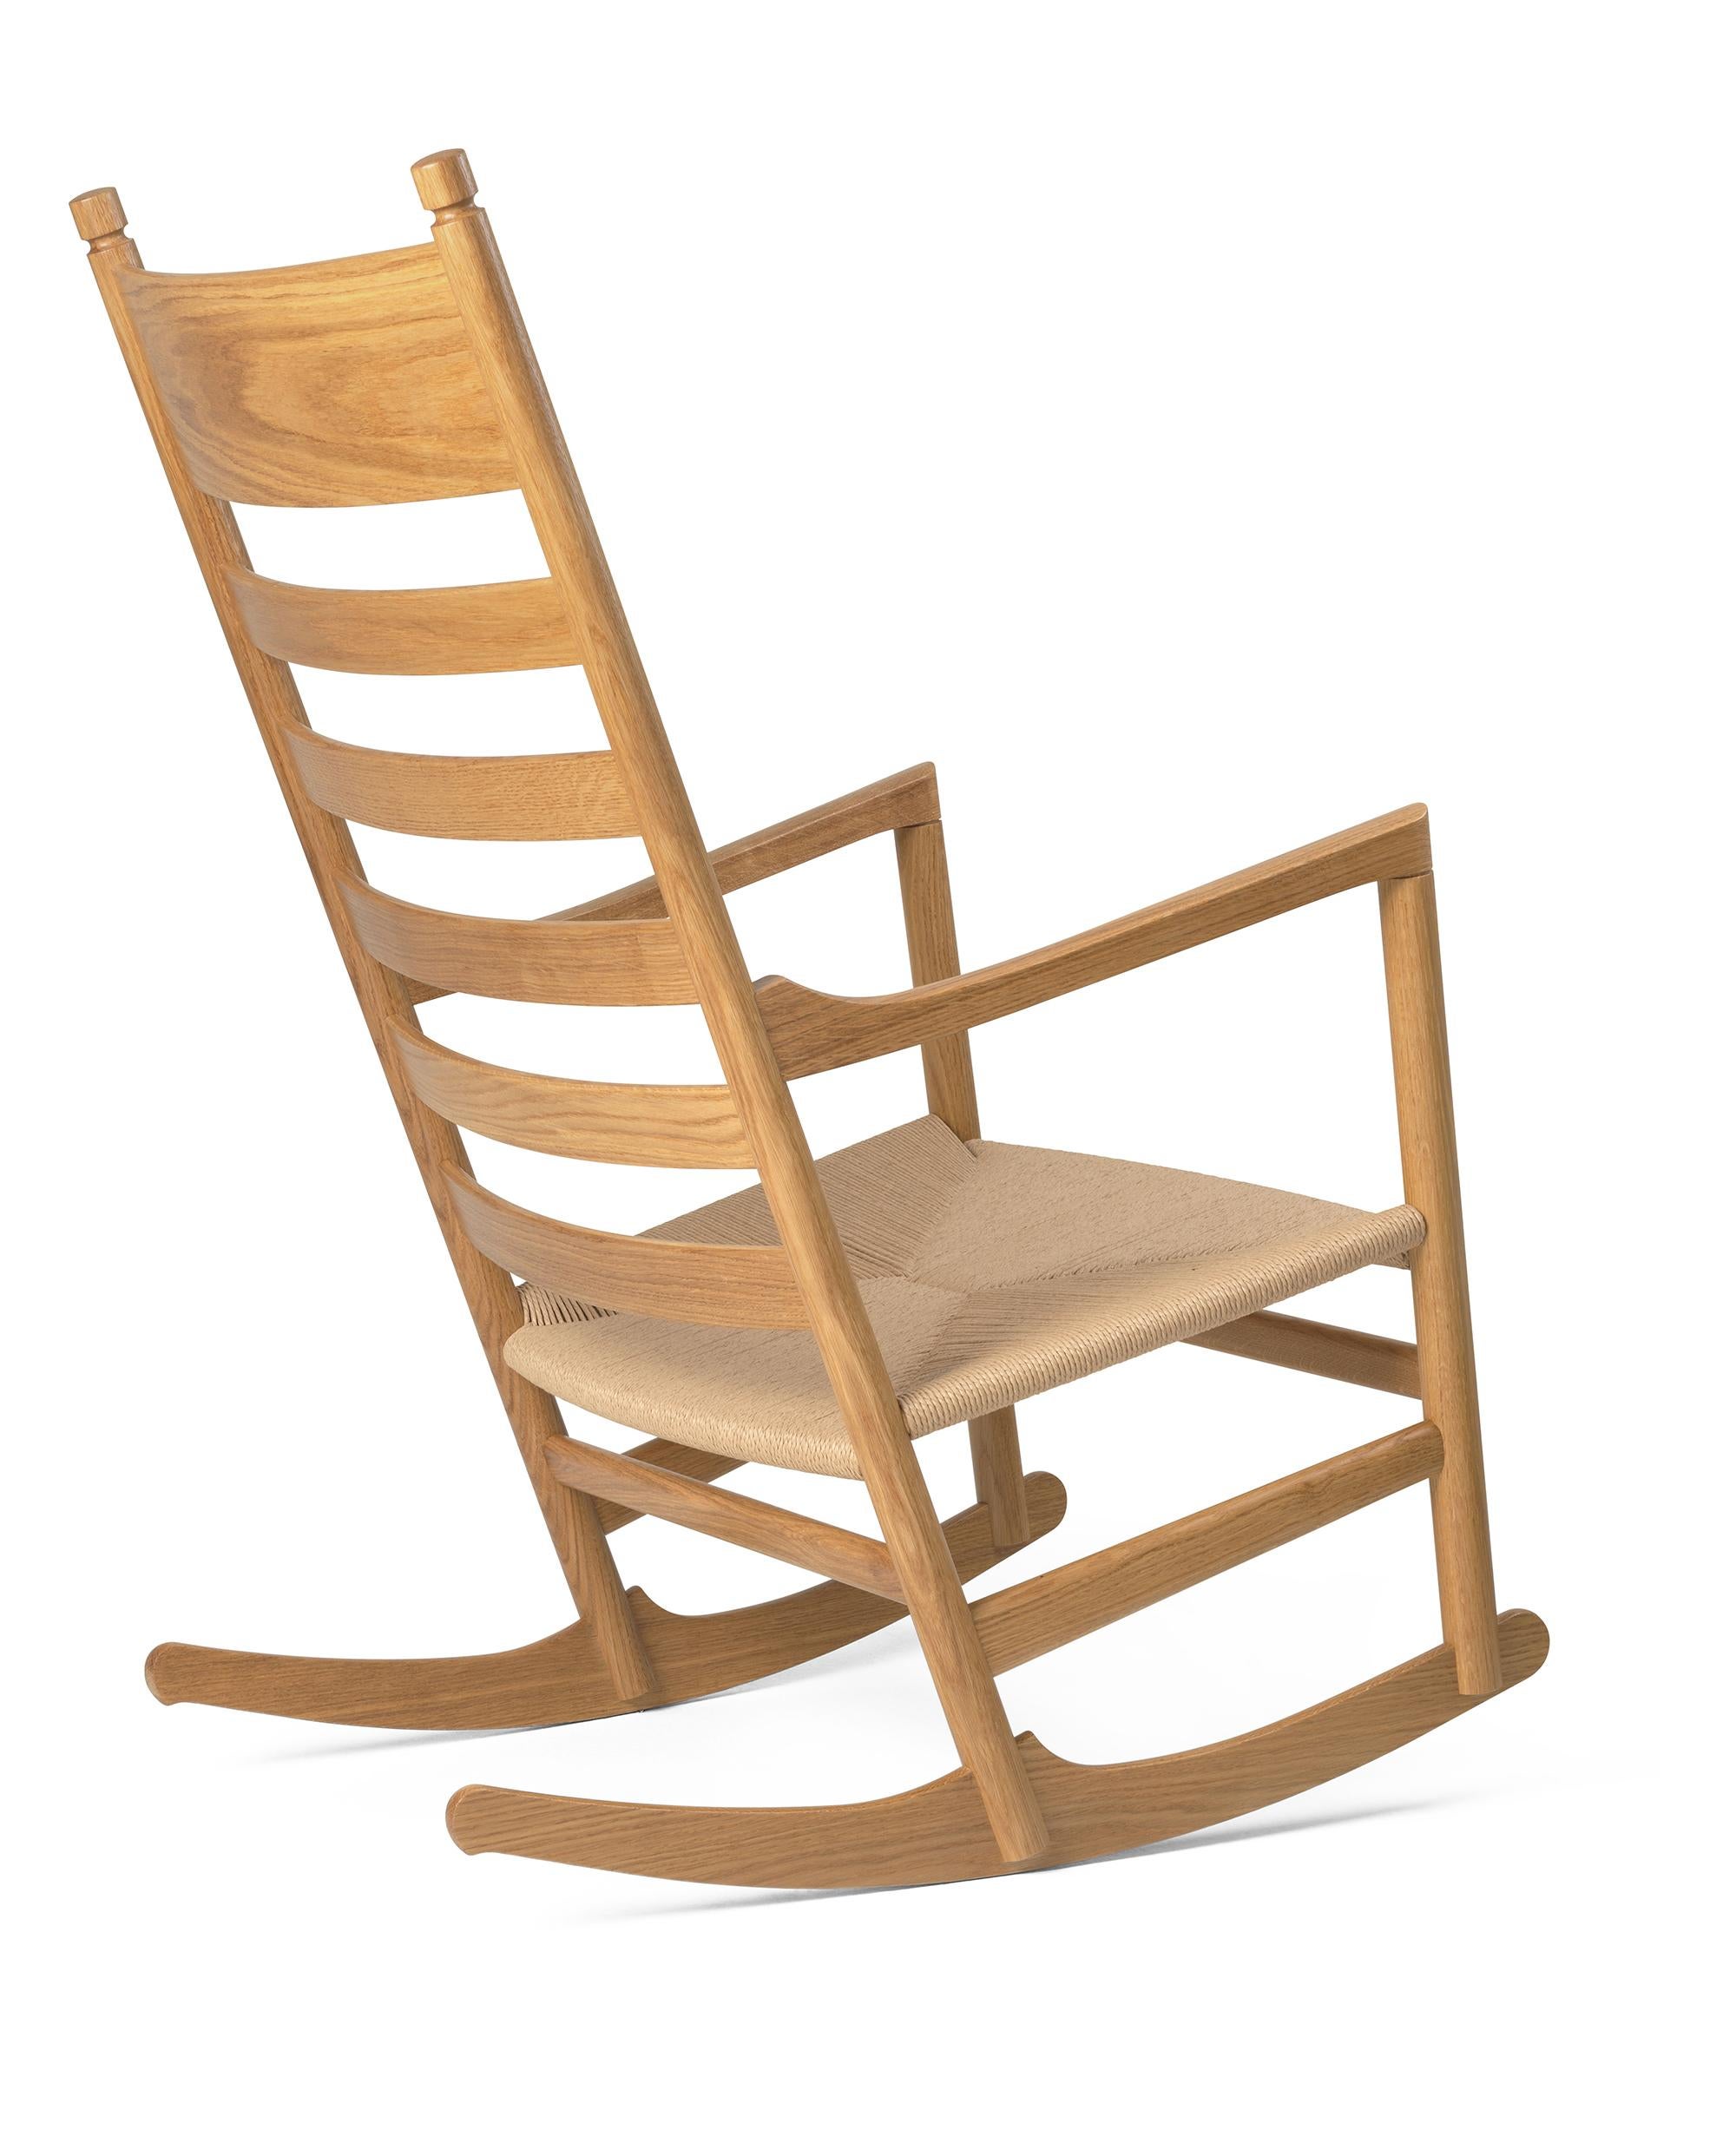 Hans J. Wegner 'CH45' Rocking Chair for Carl Hansen & Son in Oak Lacquer.

The story of Danish Modern begins in 1908 when Carl Hansen opened his first workshop. His firm commitment to beauty, comfort, refinement, and craftsmanship is evident in